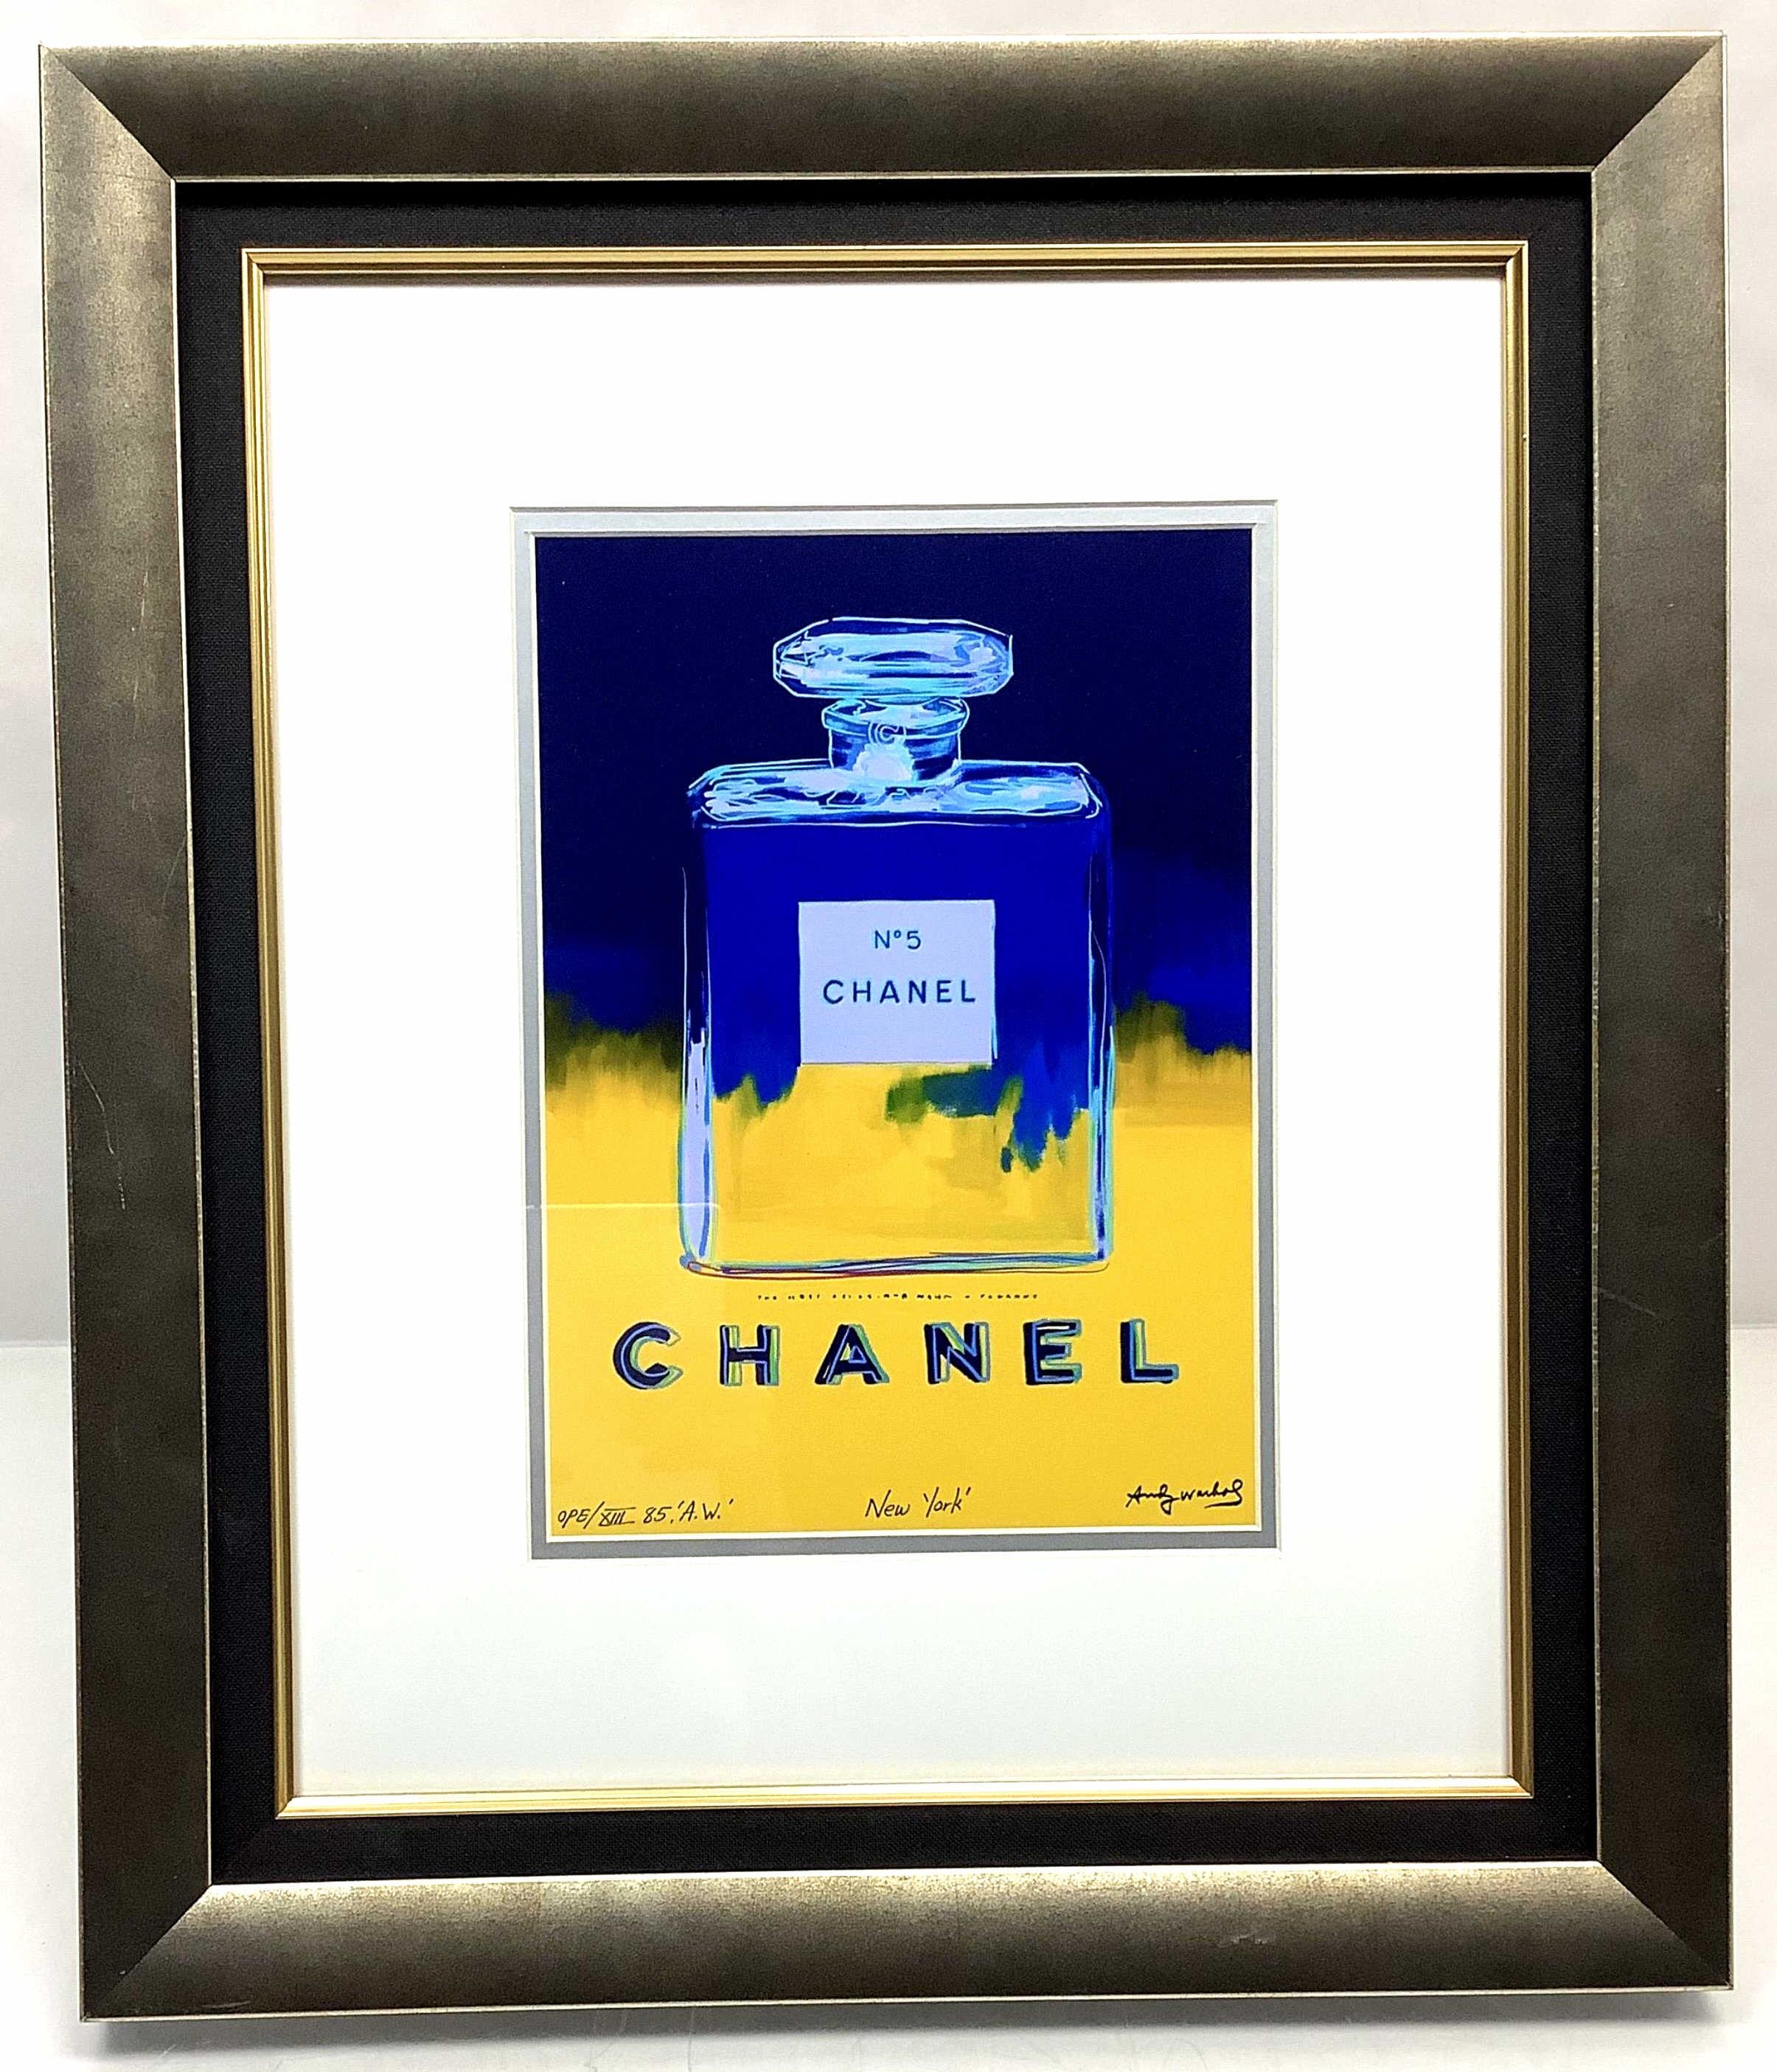 Artwork by Andy Warhol, Chanel No.5, Made of Lithograph